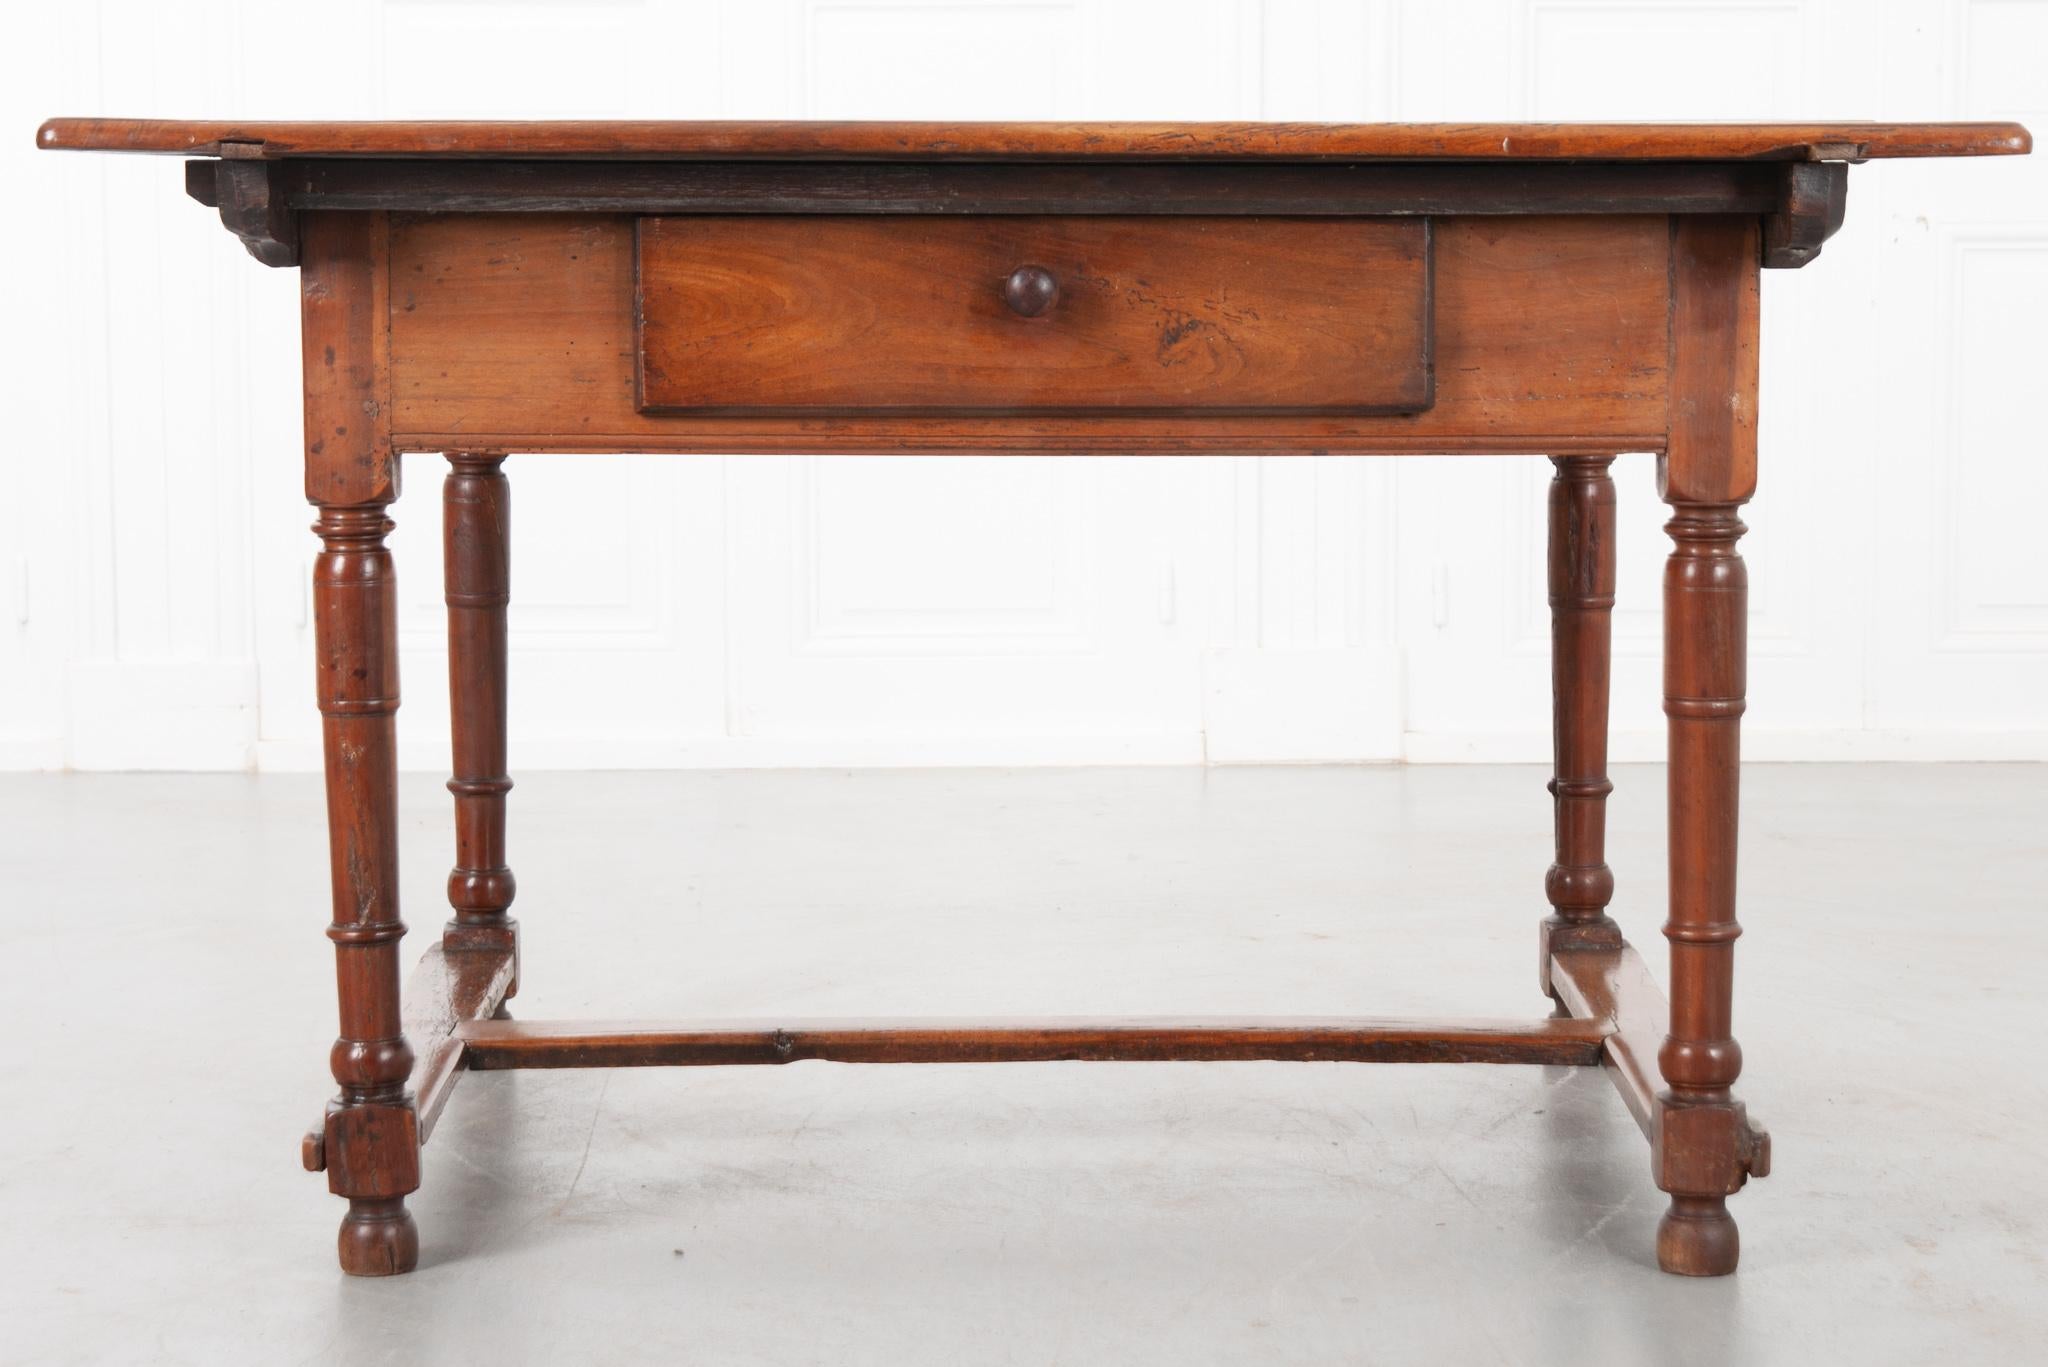 This is a nice French 19th century center table – constructed of walnut. The table’s apron has a large single drawer that can be opened with a wooden pull. It has four turned legs that are braced by a H-form stretcher below.